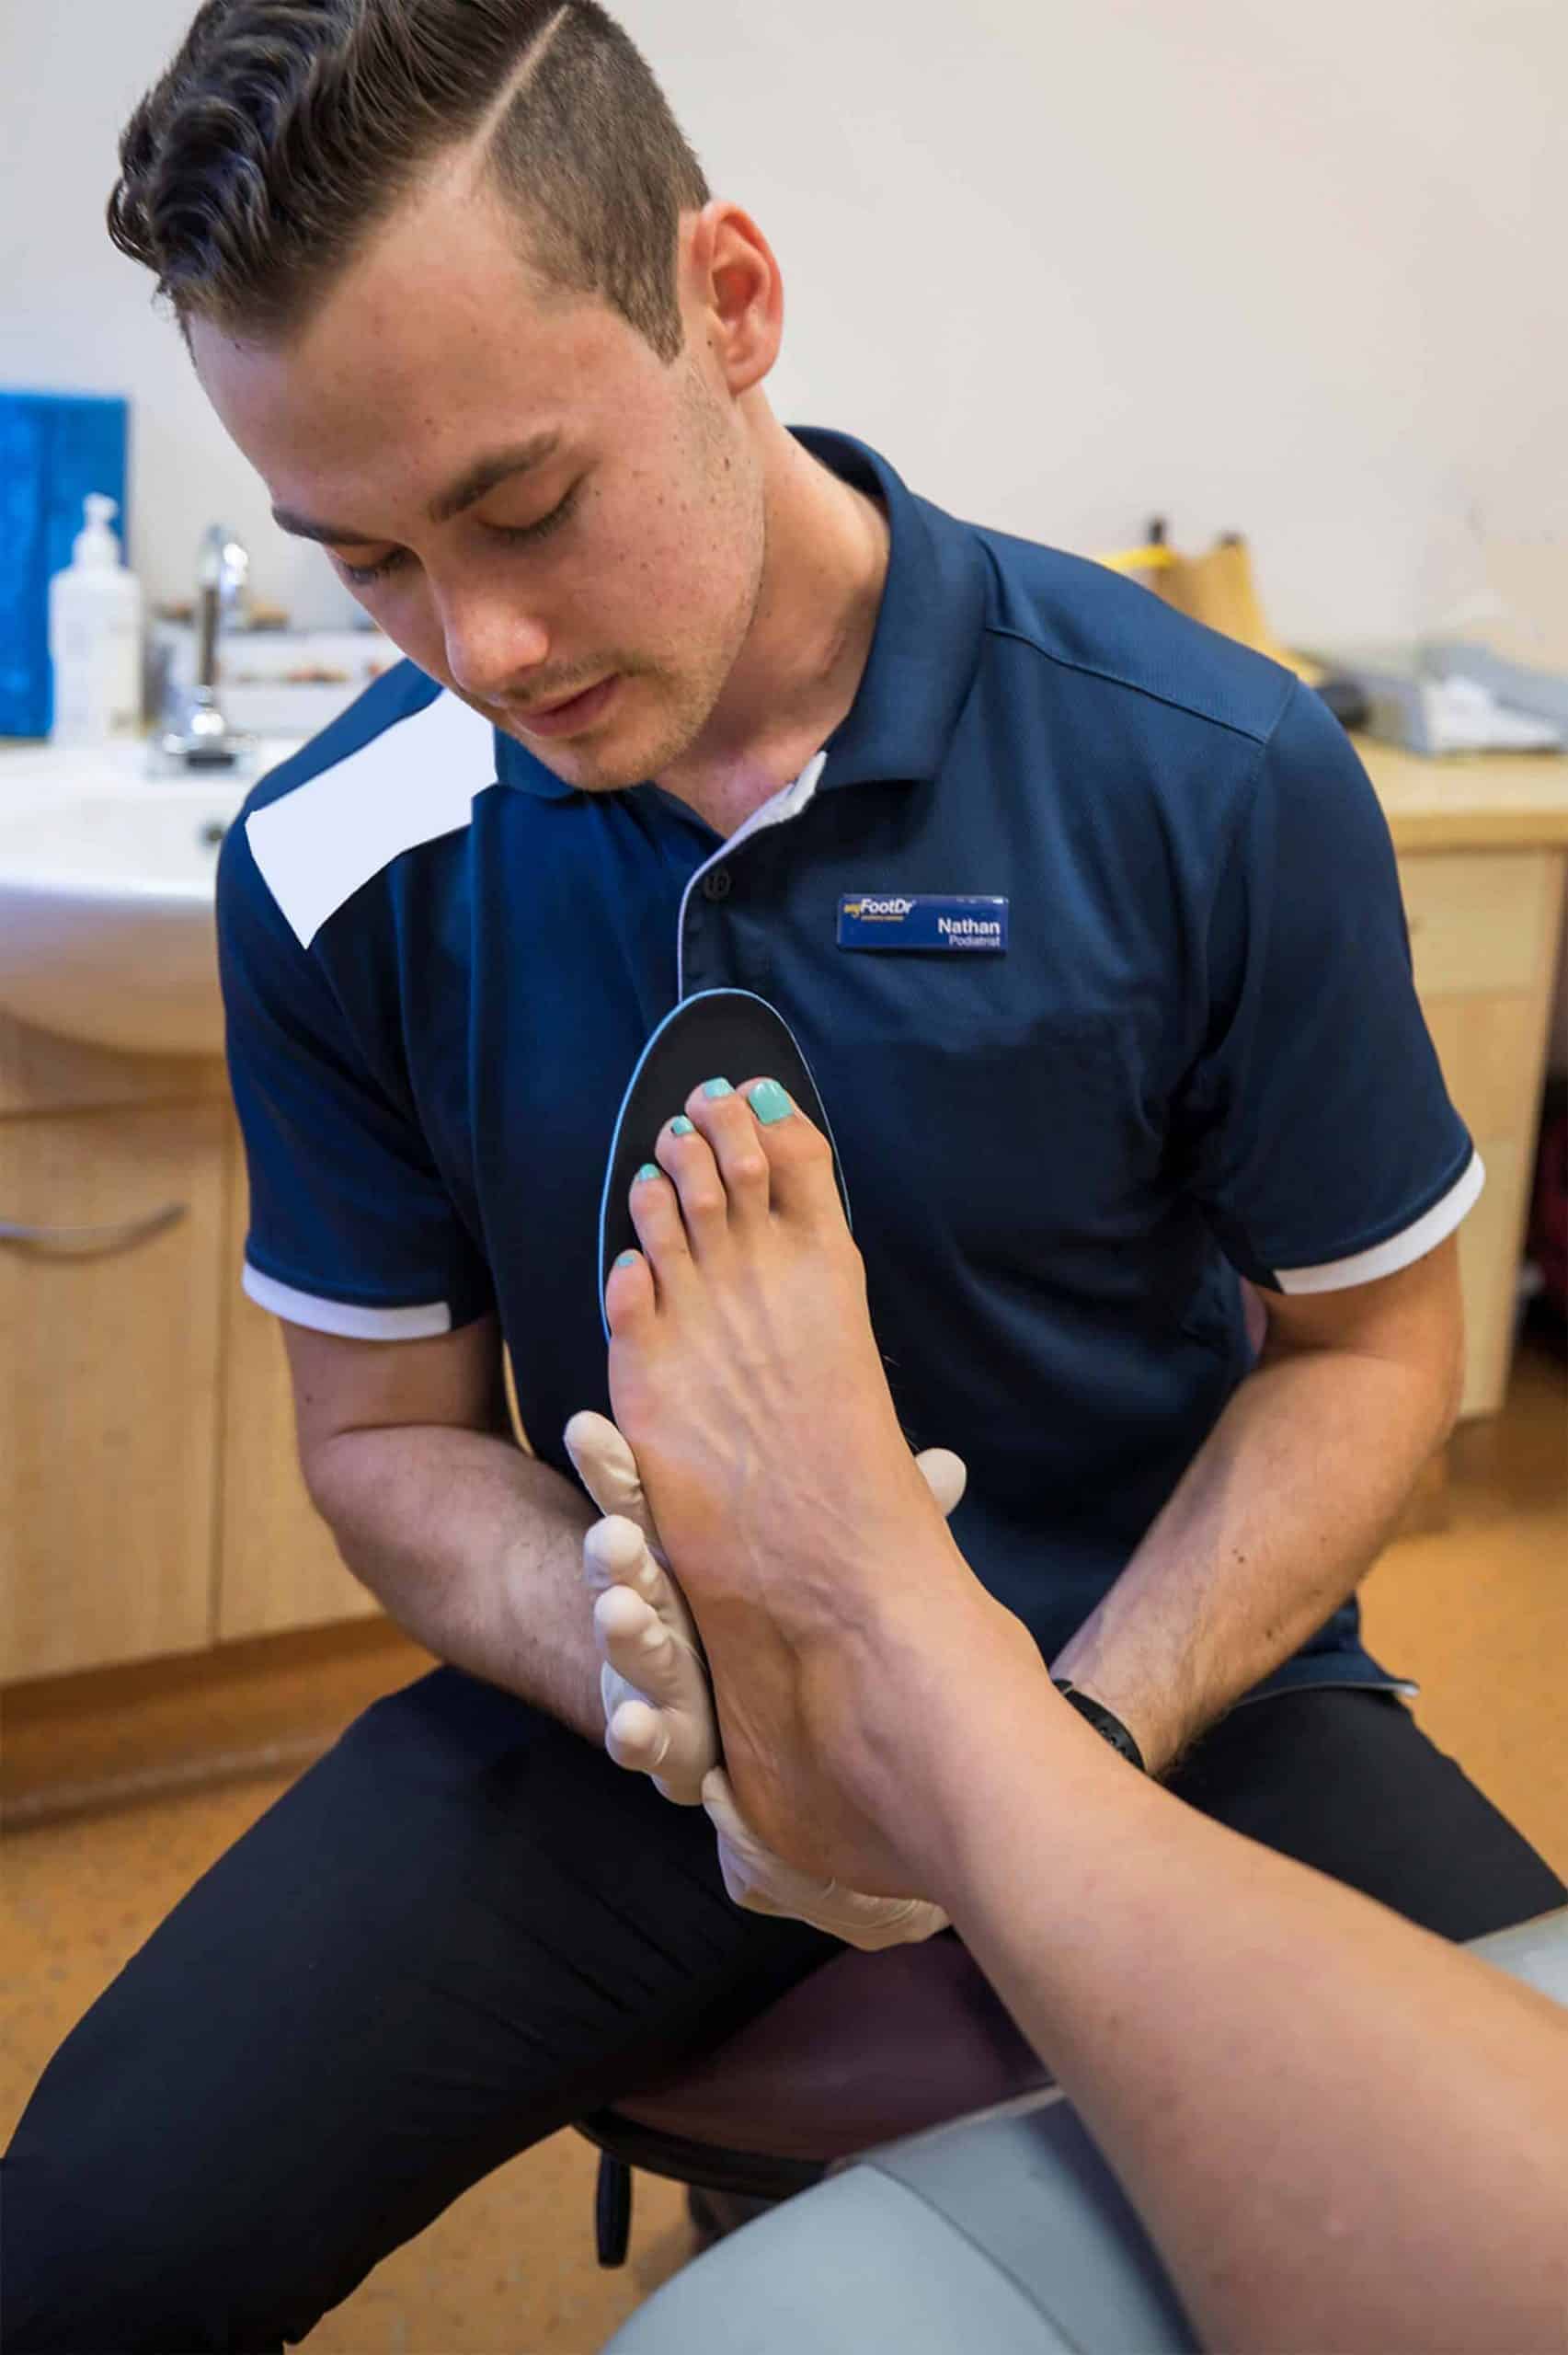 MyFootDr staff checking a patient's foot for custom foot orthotics